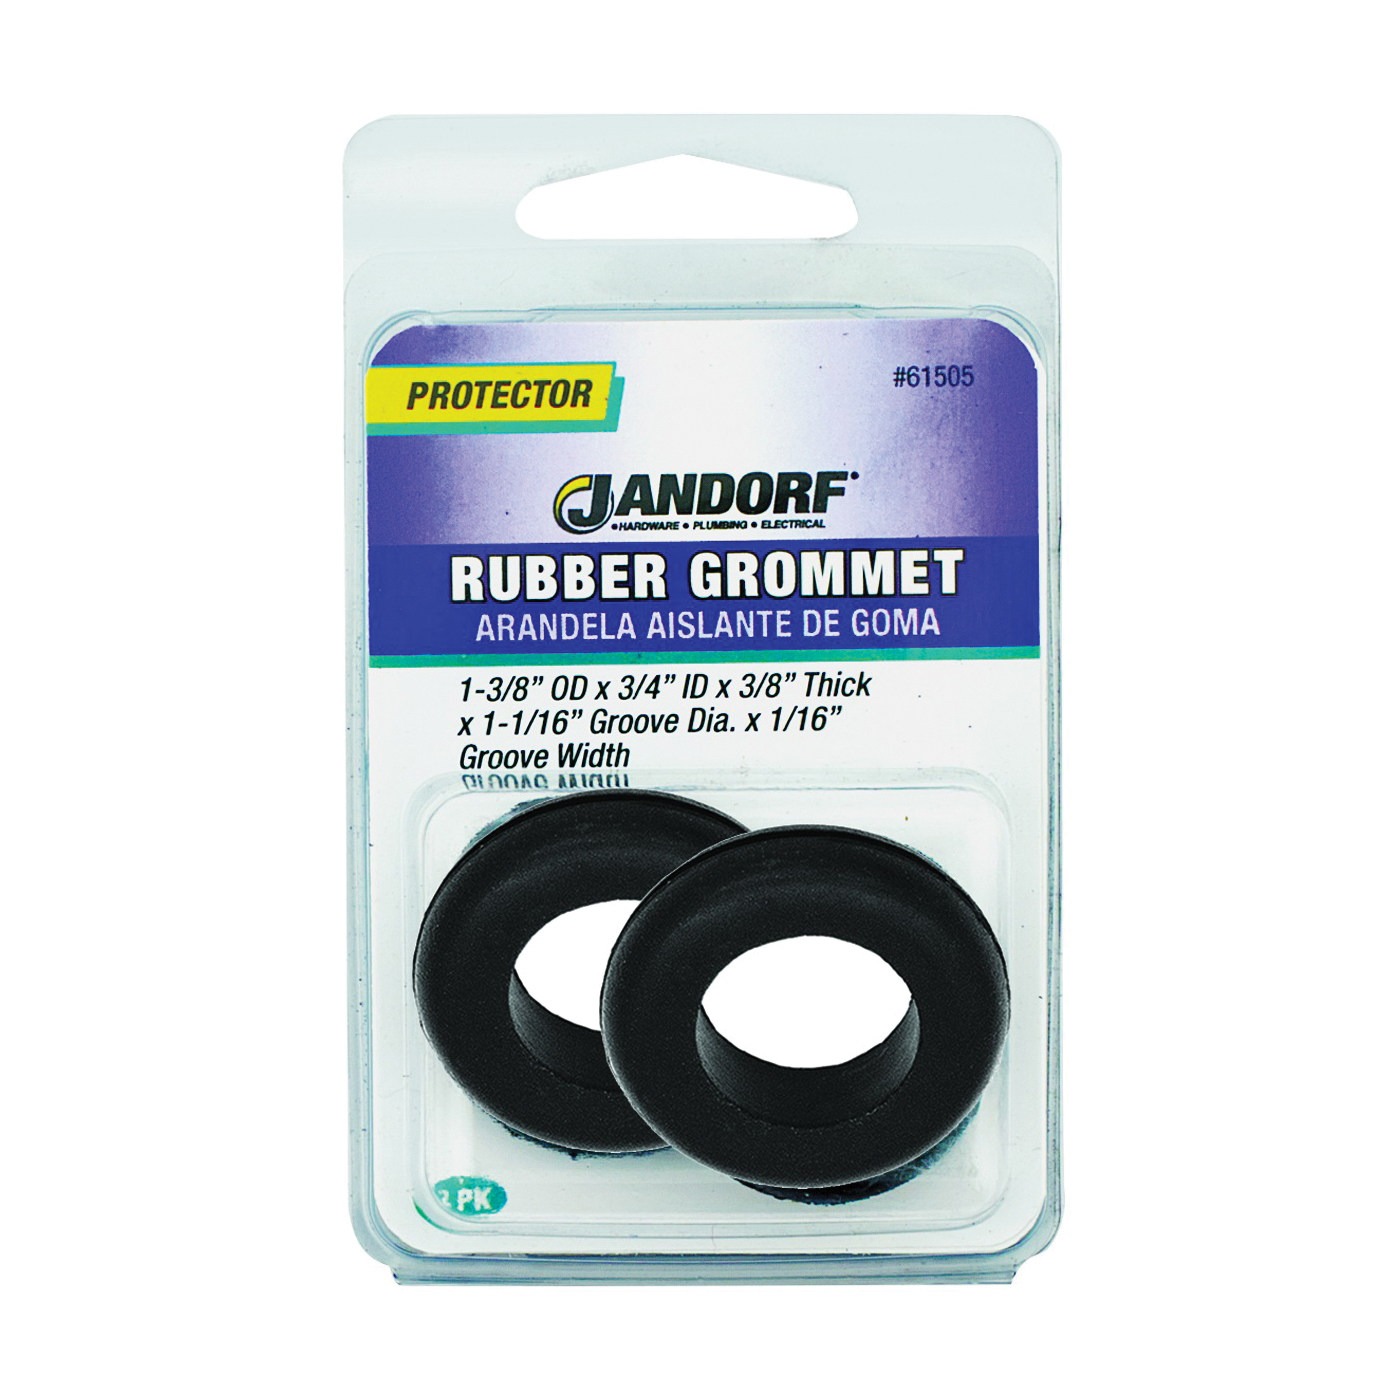 61505 Grommet, Rubber, Black, 3/8 in Thick Panel